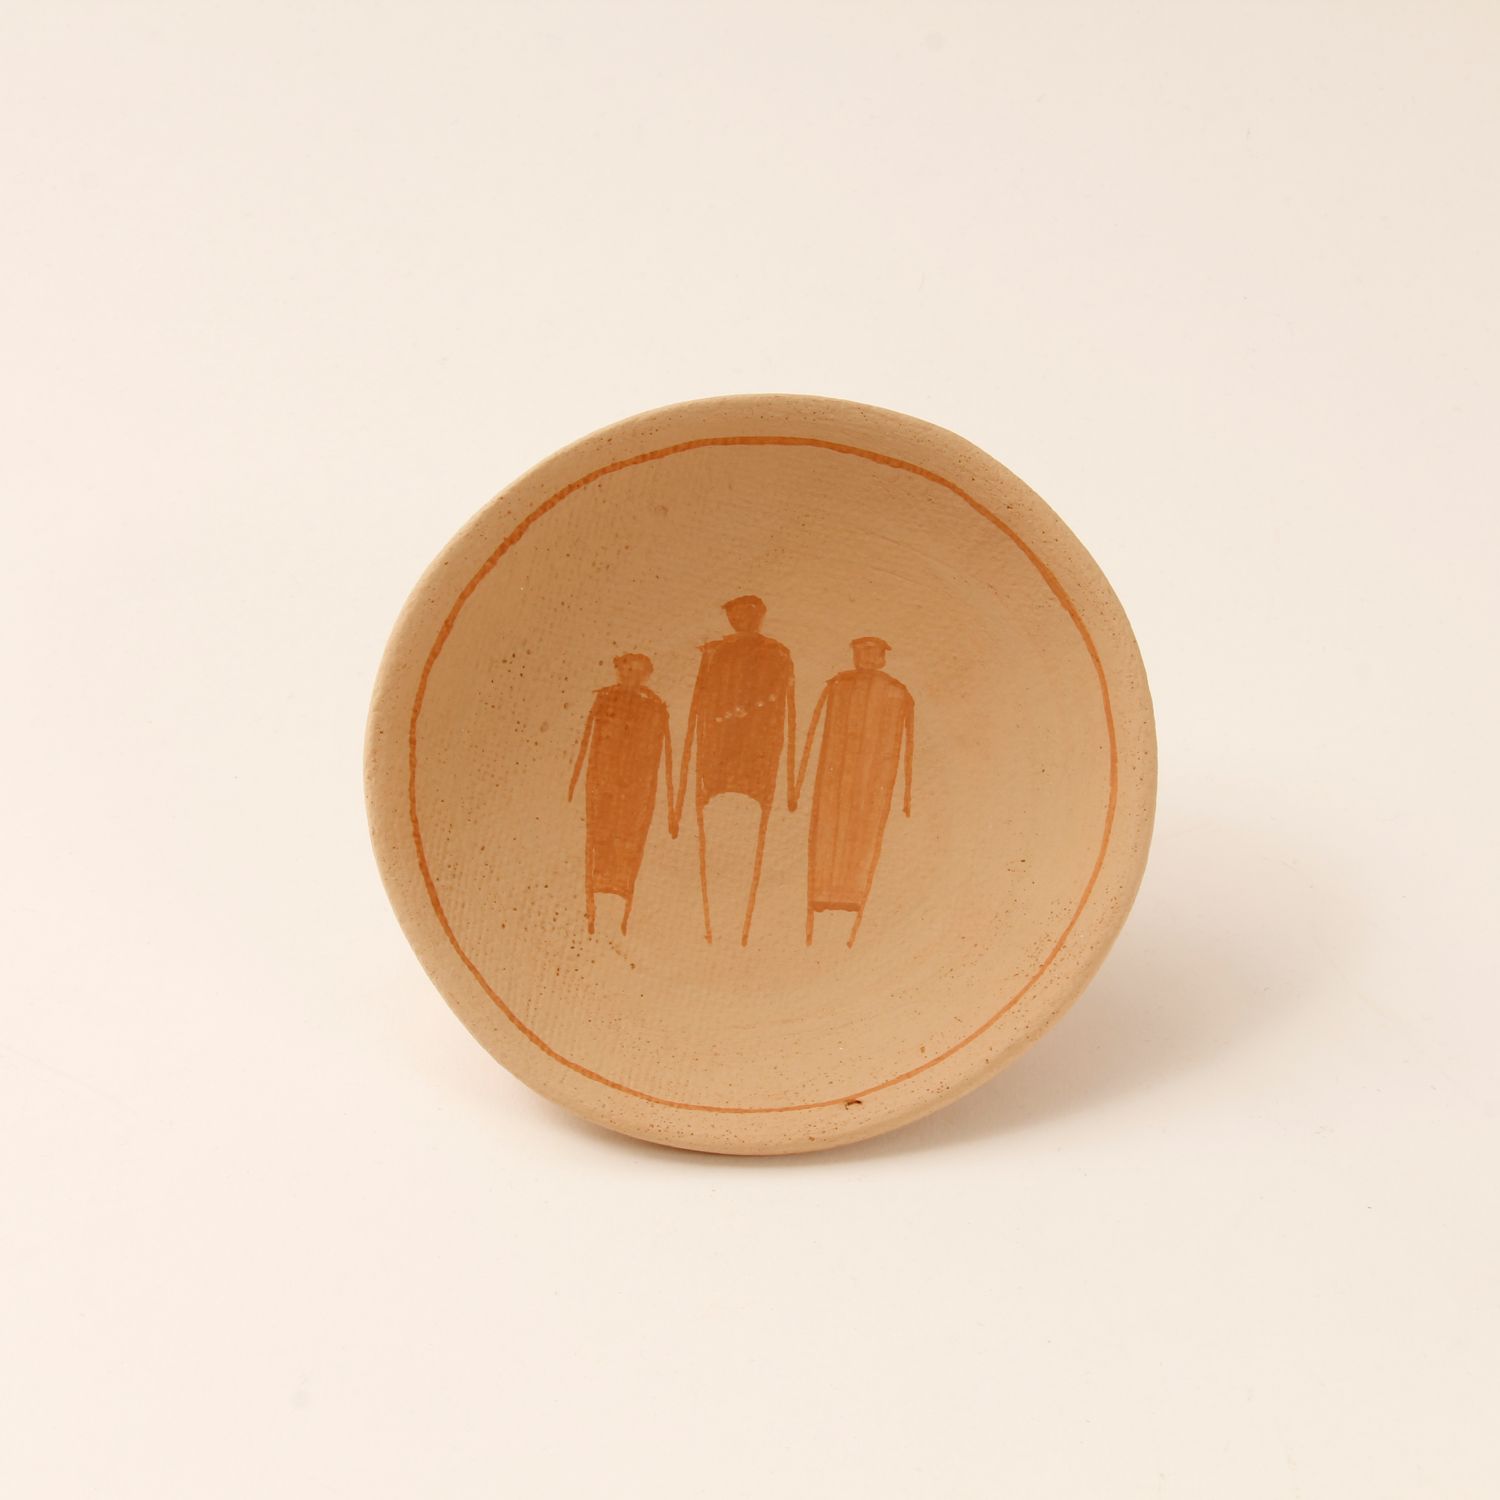 David Migwans: Assorted Family Bowl with Three Figures (Each sold separately) Product Image 2 of 2